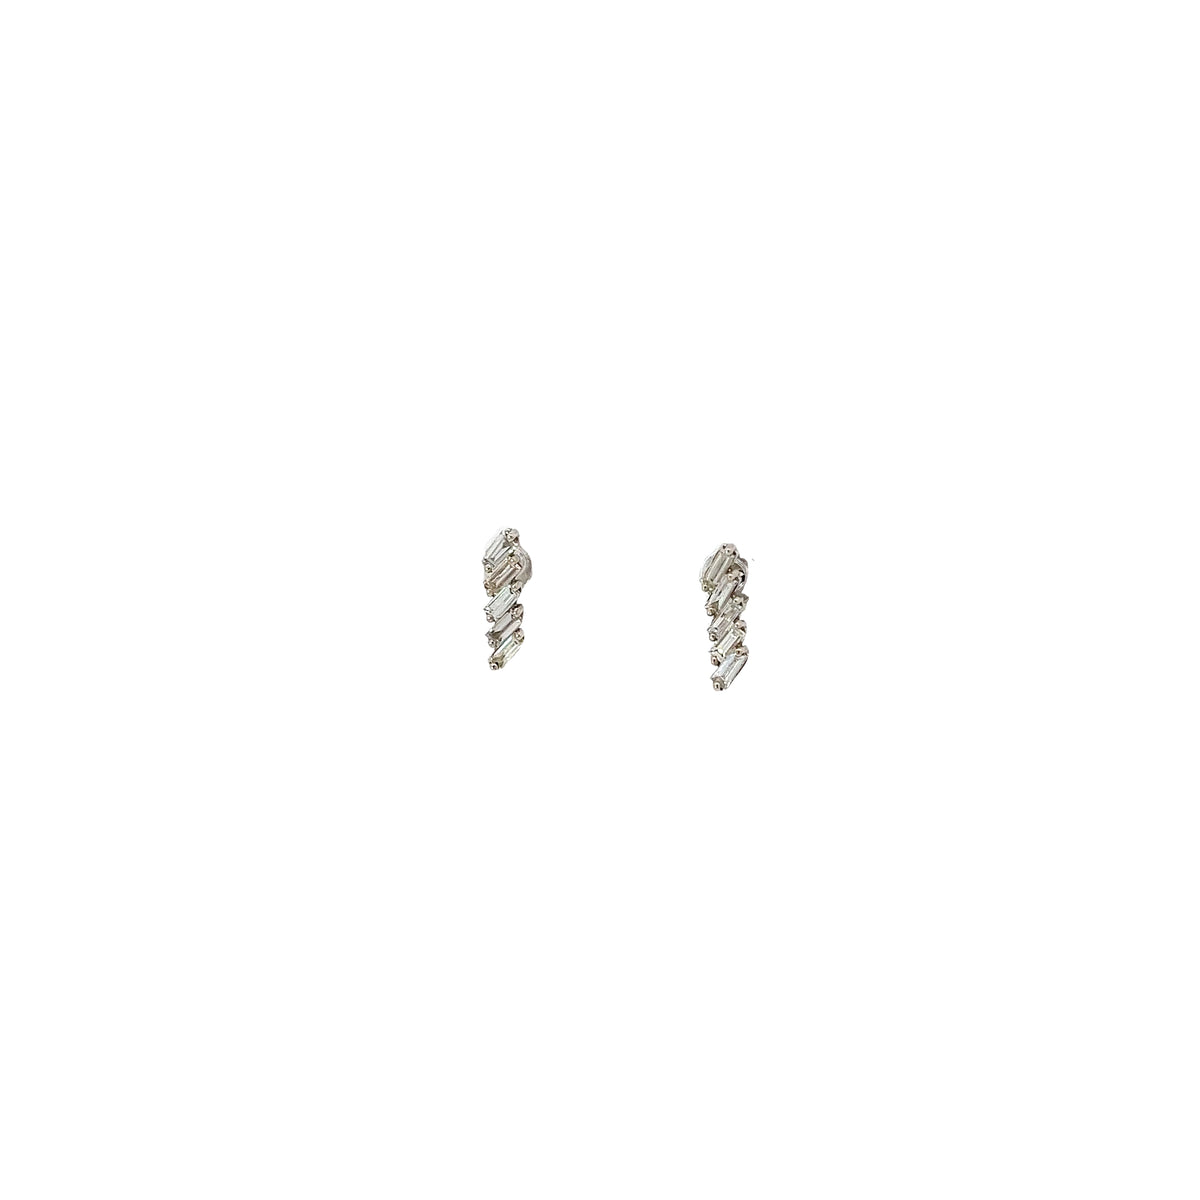 14k yellow and white gold Baguette shaped diamond earrings